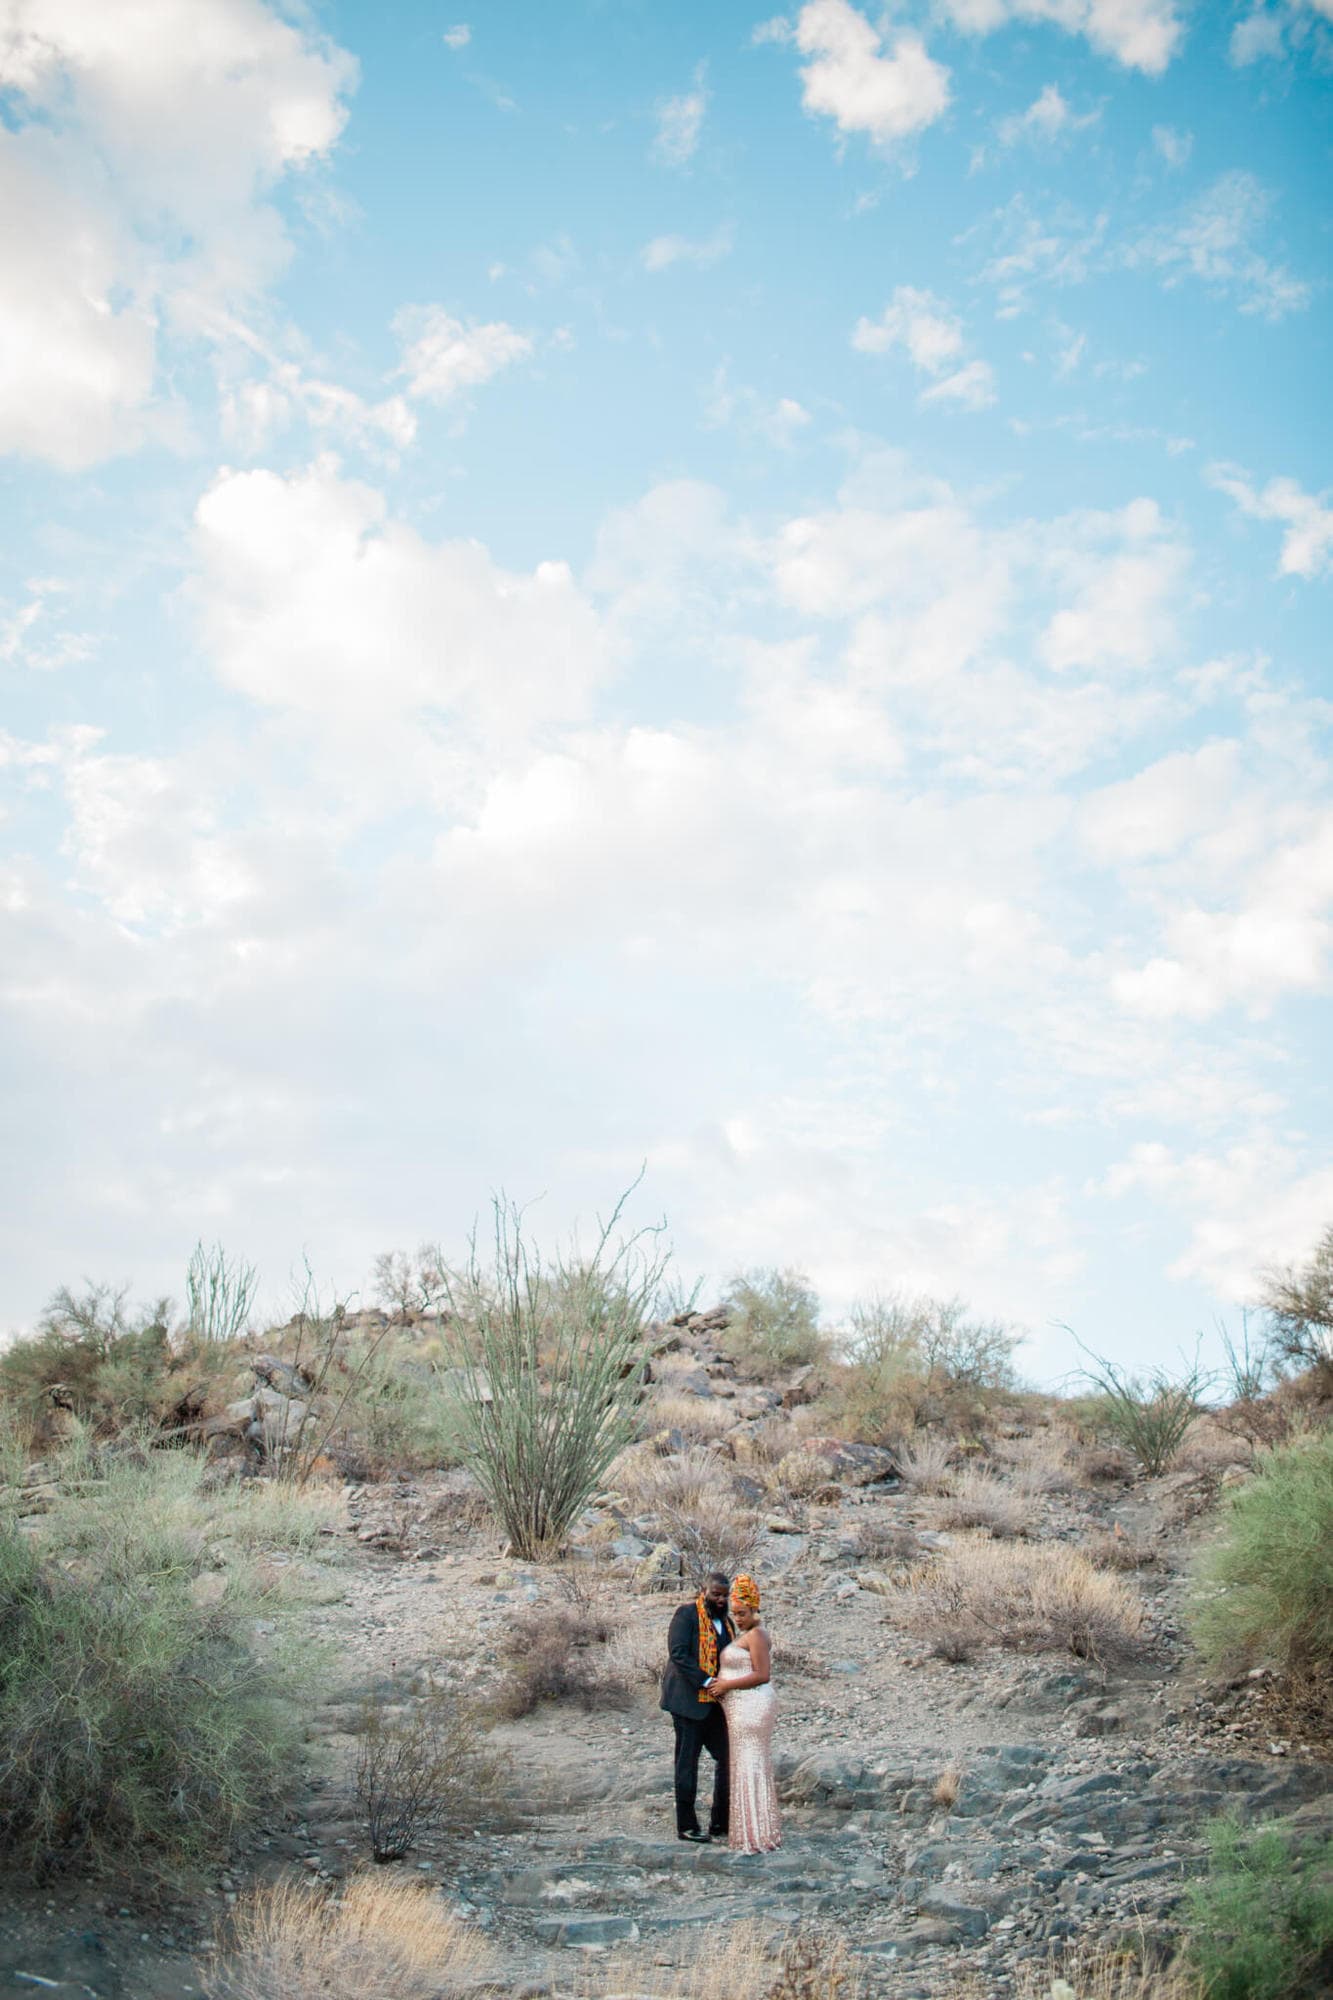 Drew and Angelica's vision for their Adventure Maternity session was Editorial Vogue Wakanda and they were every bit as fierce as their vision suggested!